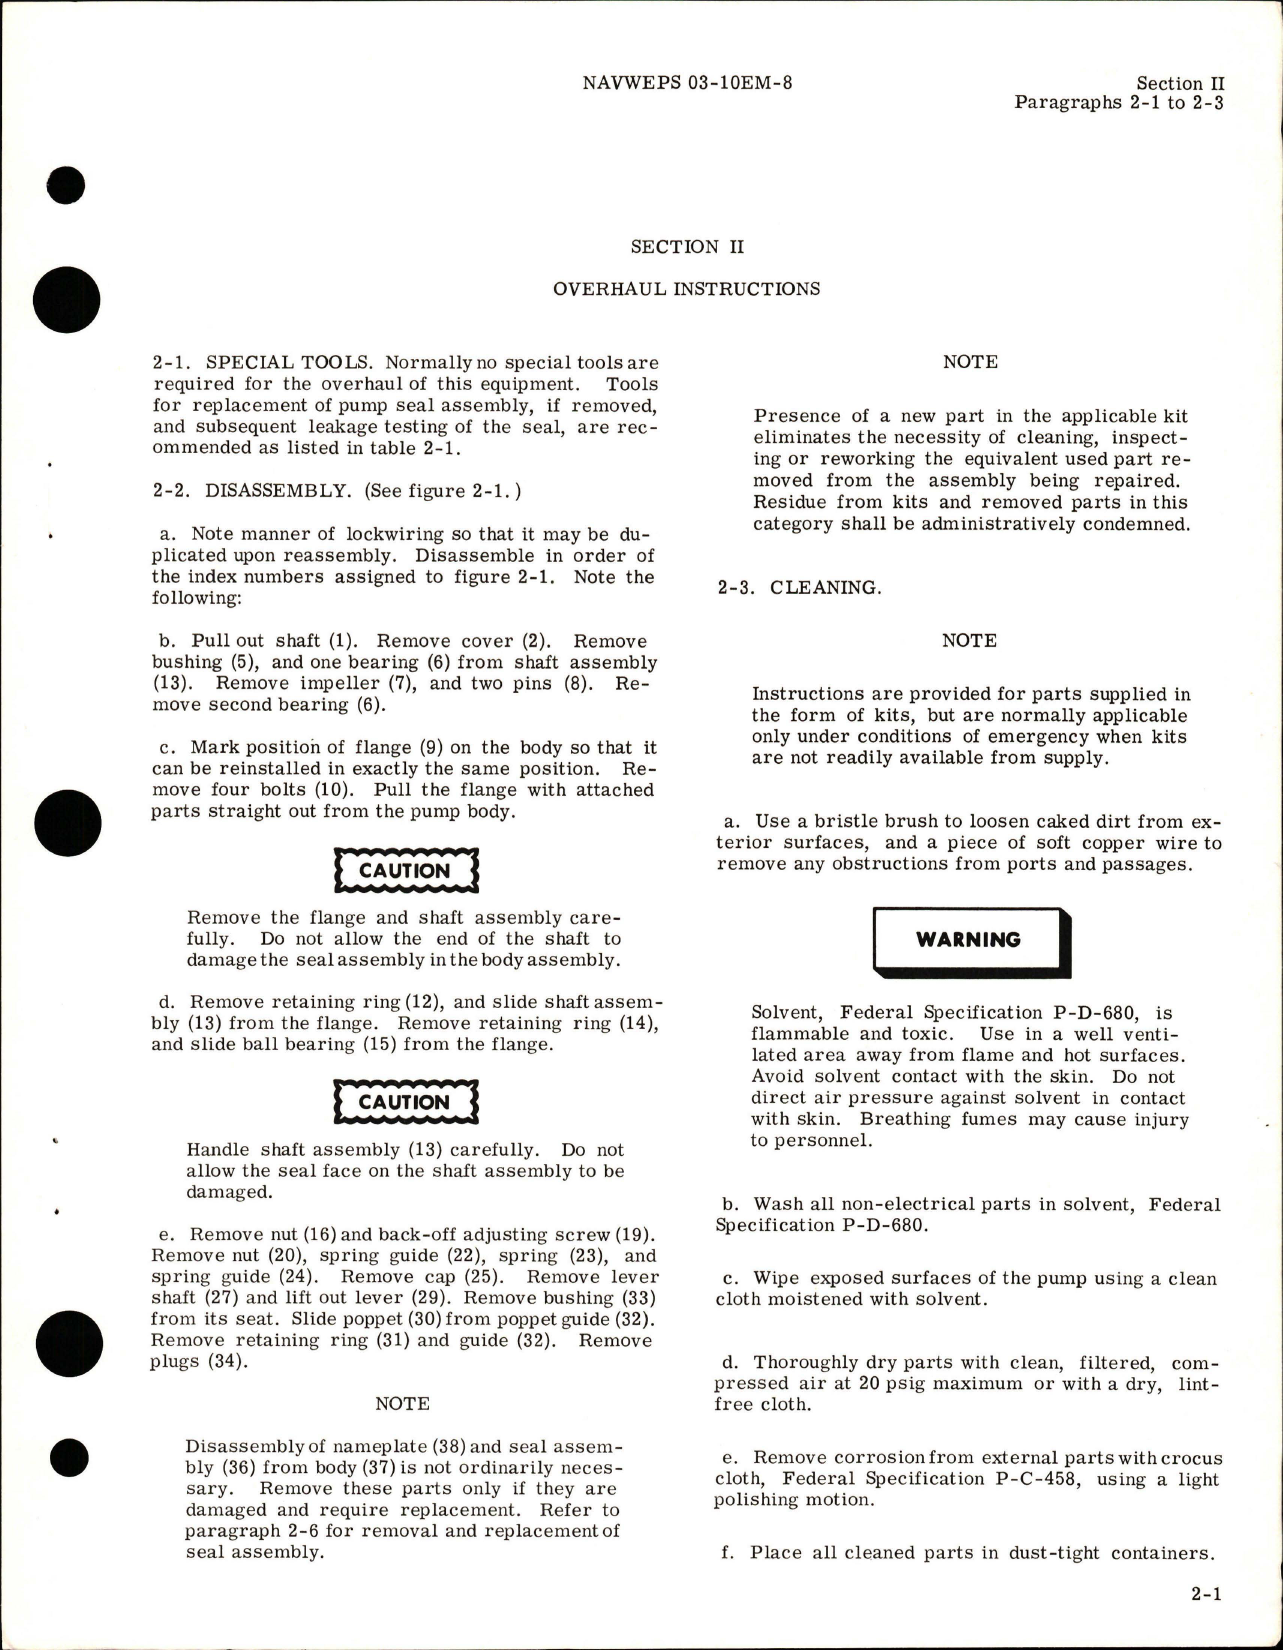 Sample page 5 from AirCorps Library document: Overhaul Instructions for Fuel Boost Pump (Engine Driven) - Part 23900 and 50138 